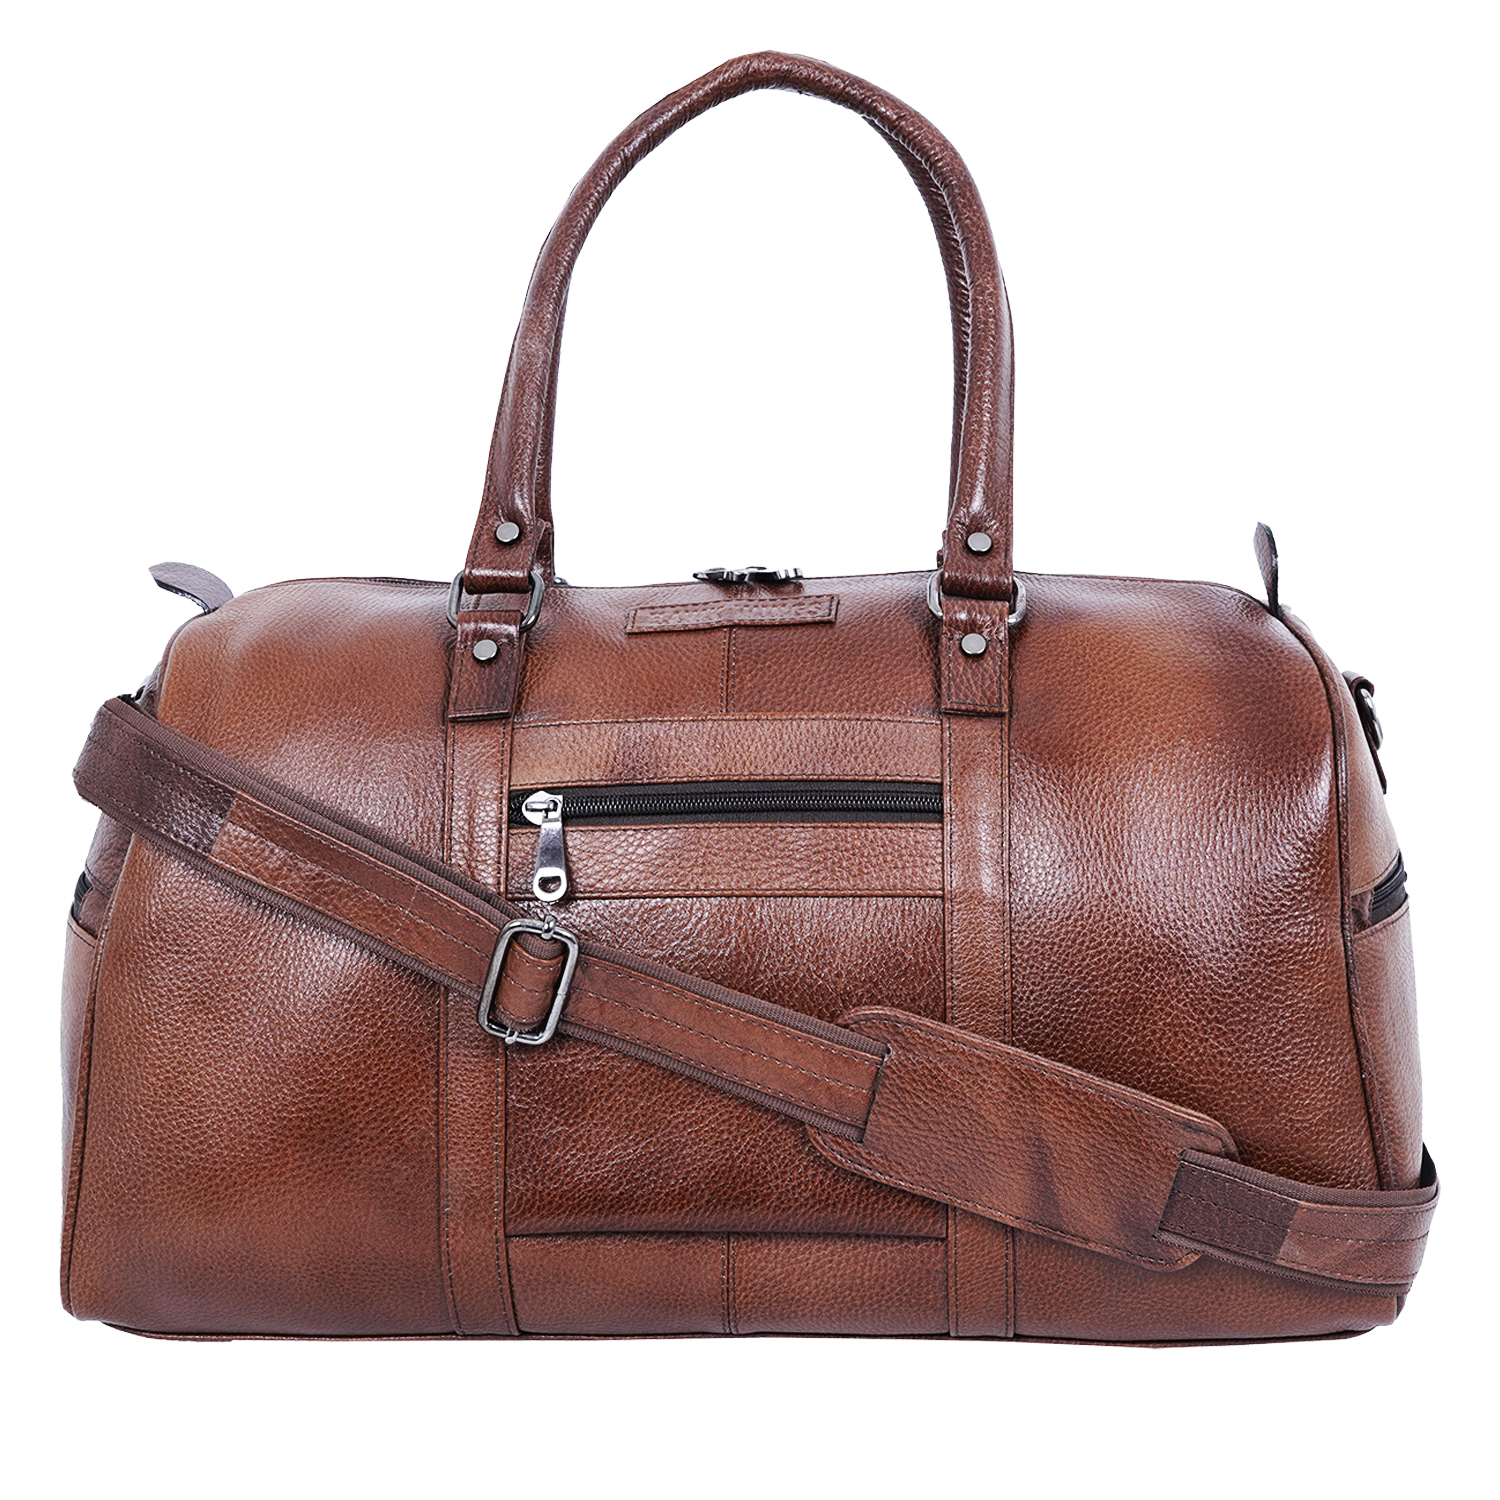 Leather Travel Duffle Bag for Men Women - Leather Duffel Carry on Overnight Weekender Bags Tan-asset-179